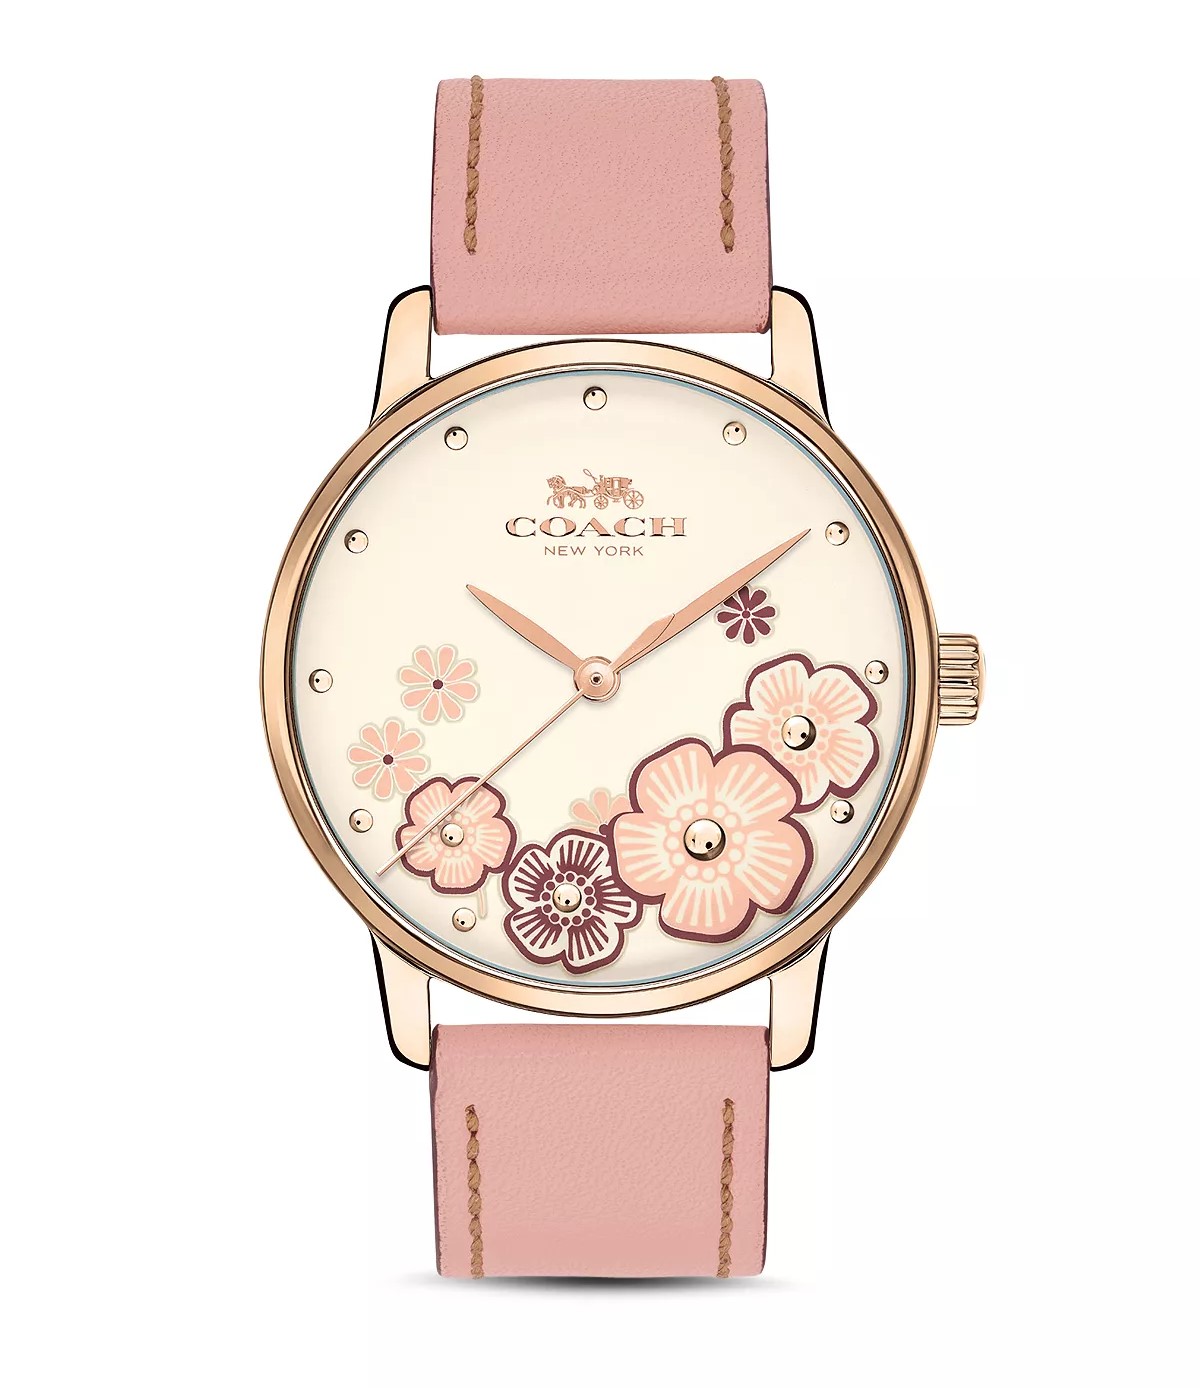 ĐỒNG HỒ NỮ COACH FLORAL GRAND ANALOG QUART GOLD STAINLESS STEEL PINK LEATHER STRAP WOMEN WATCH 14503060 4